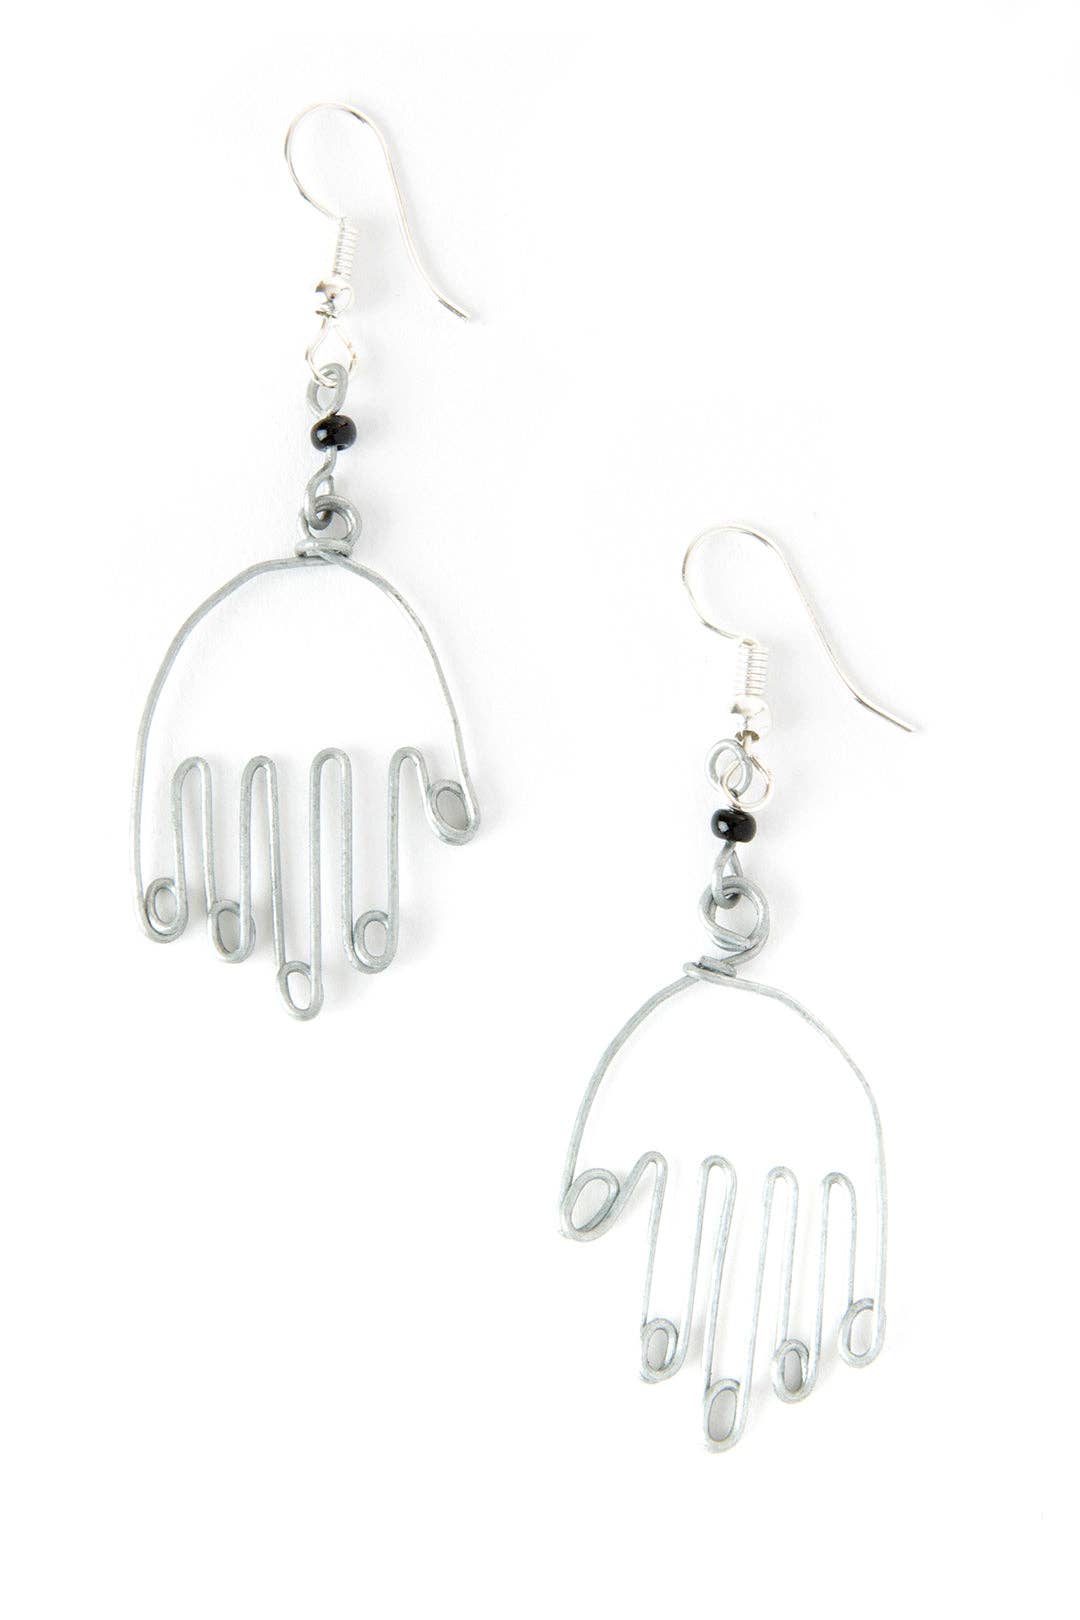 Show of Hands Recycled Wire Earrings